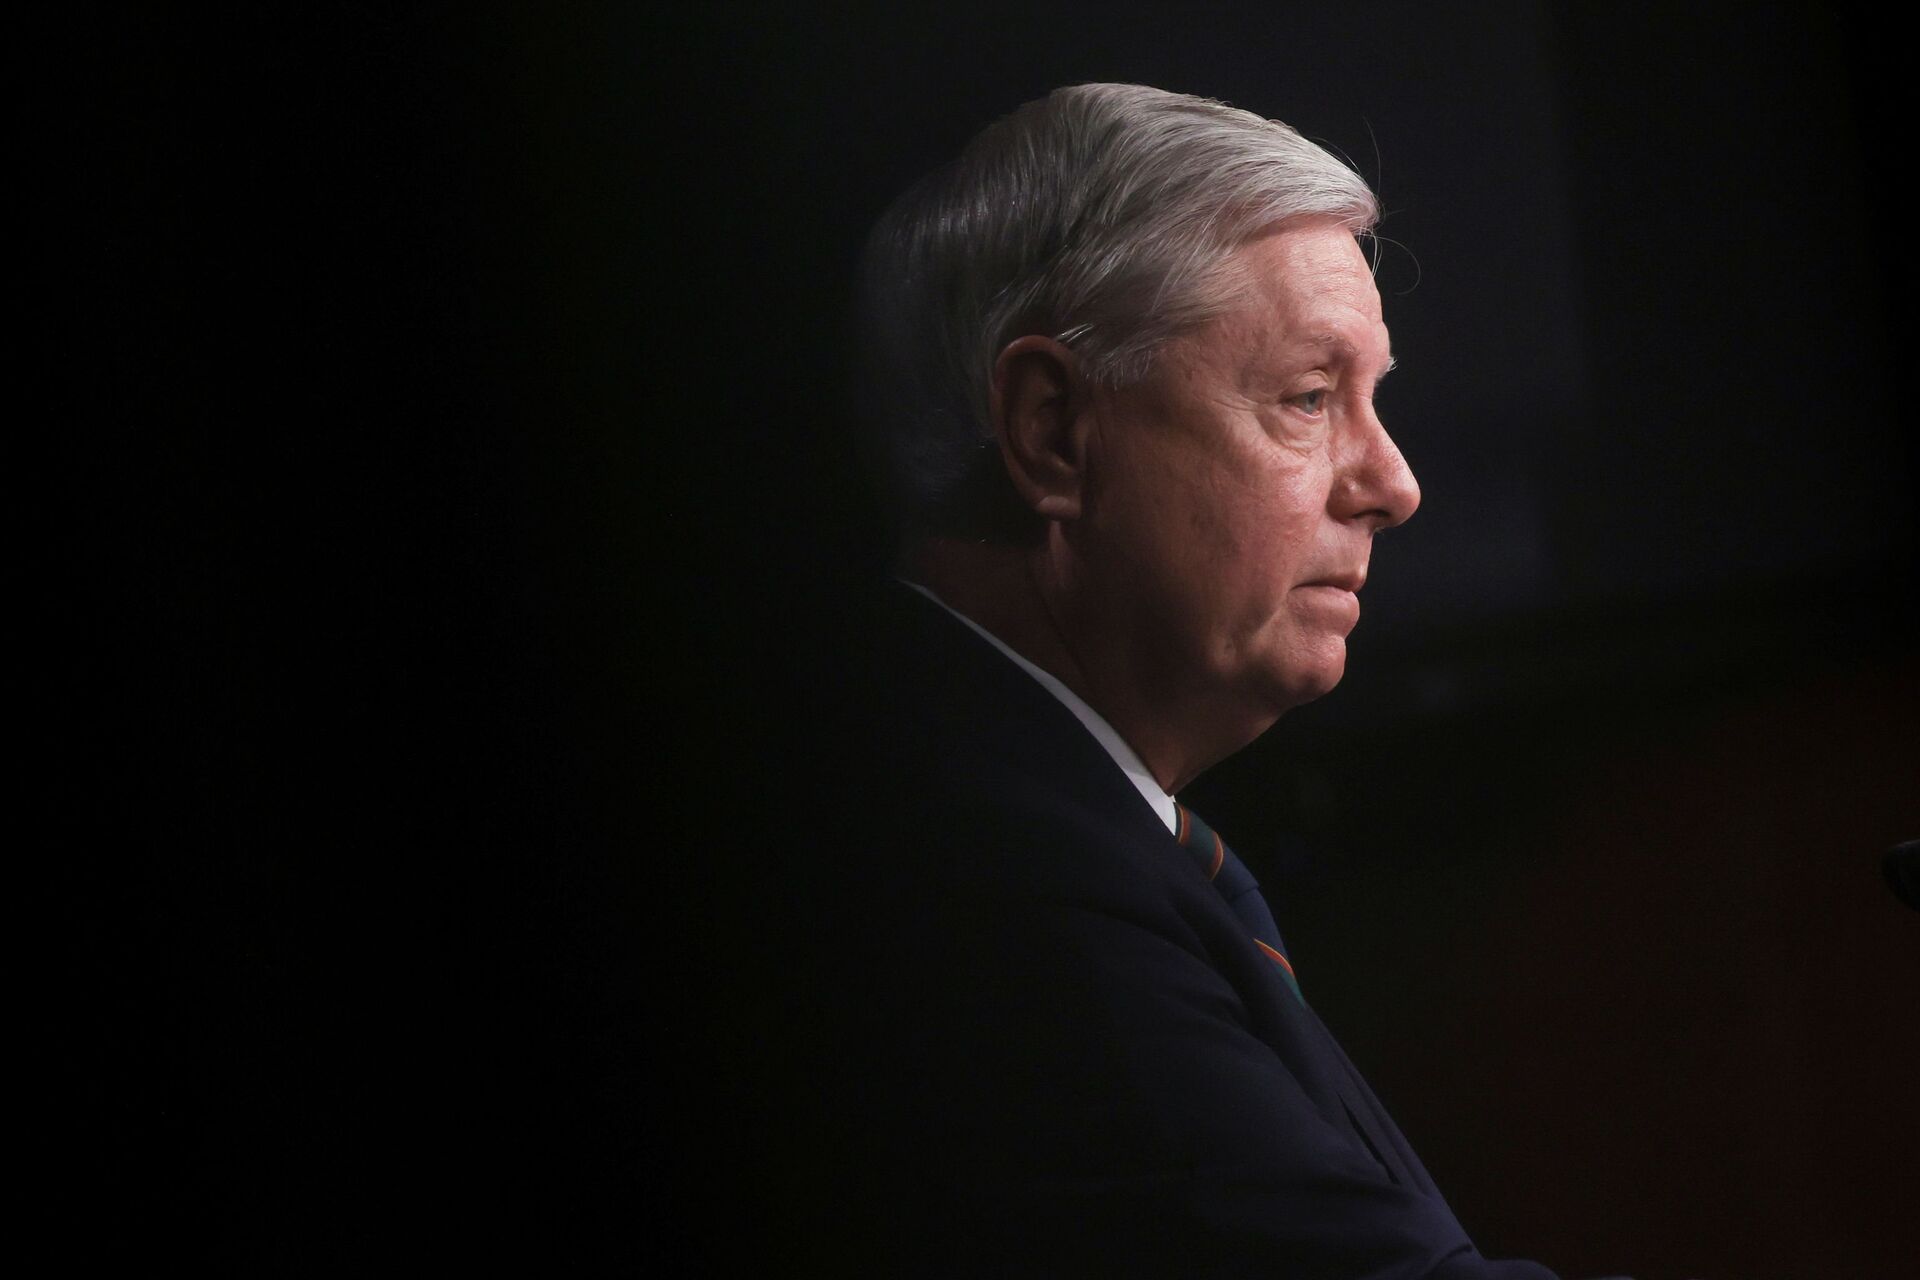 Impeachment Based on Partisan Hatred Could Become 'the Norm' in US, Senator Graham Says - Sputnik International, 1920, 14.02.2021